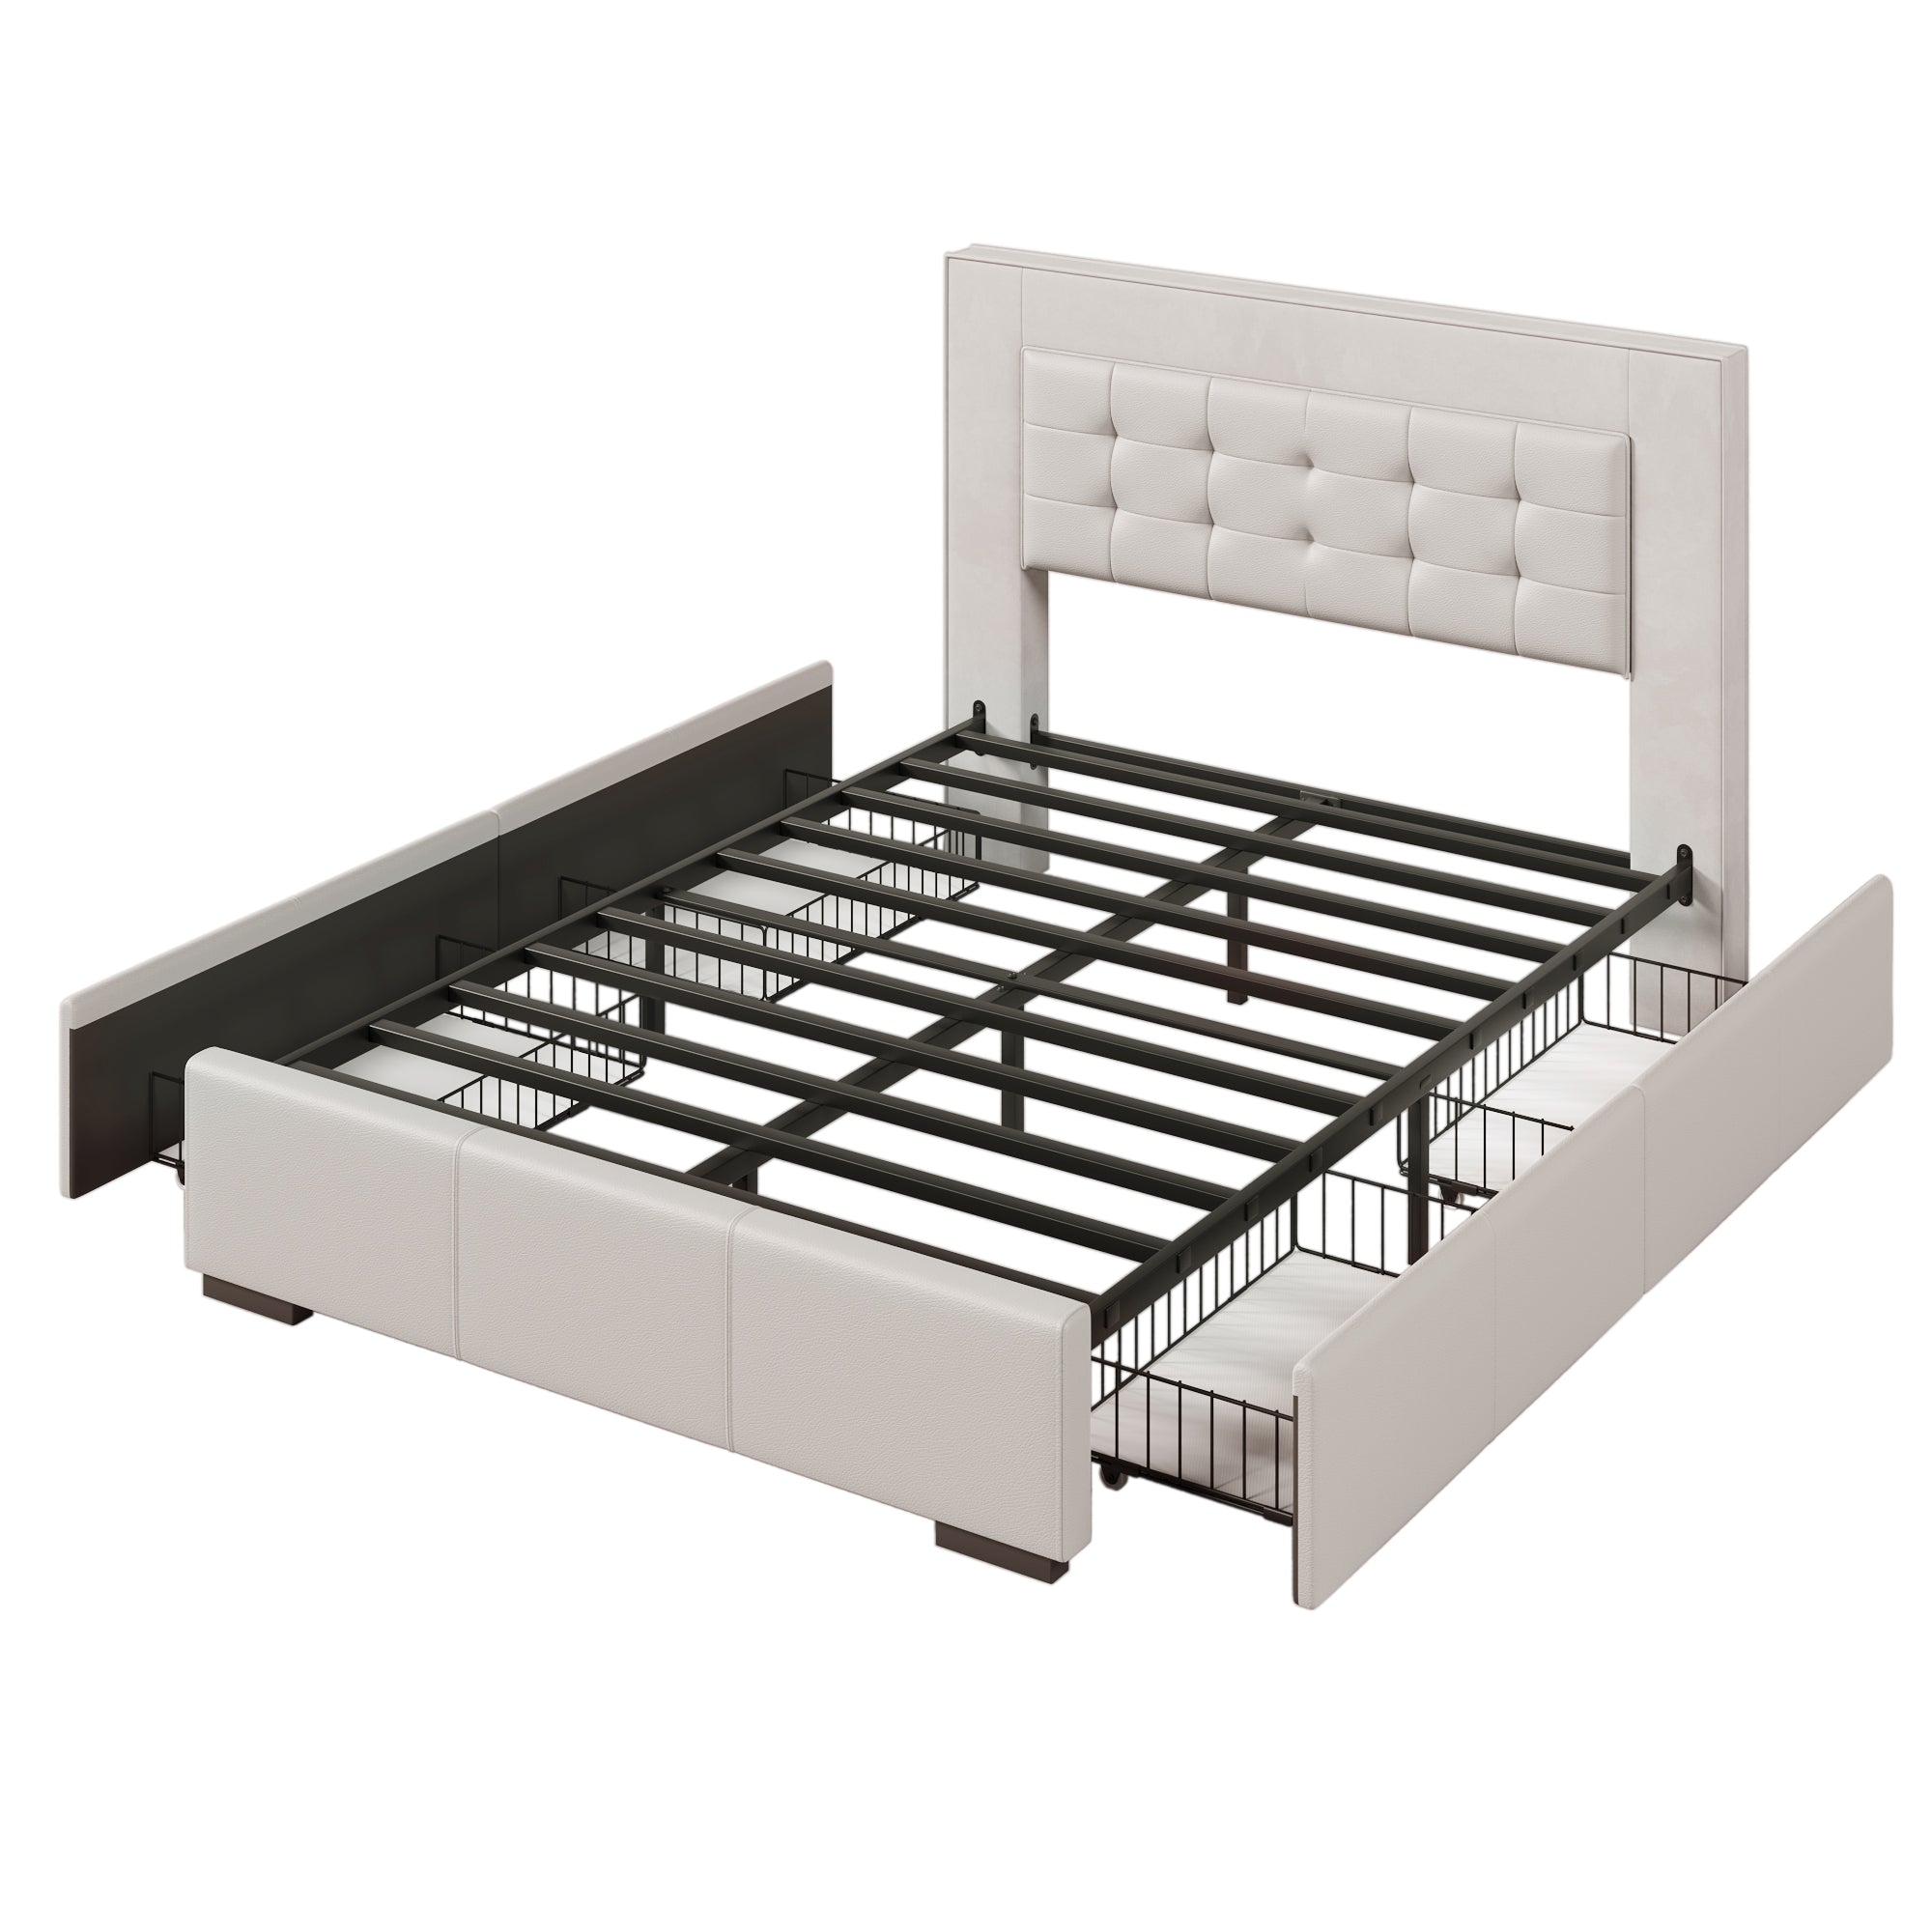 Upholstered Queen Platform Bed Frame with Four Drawers